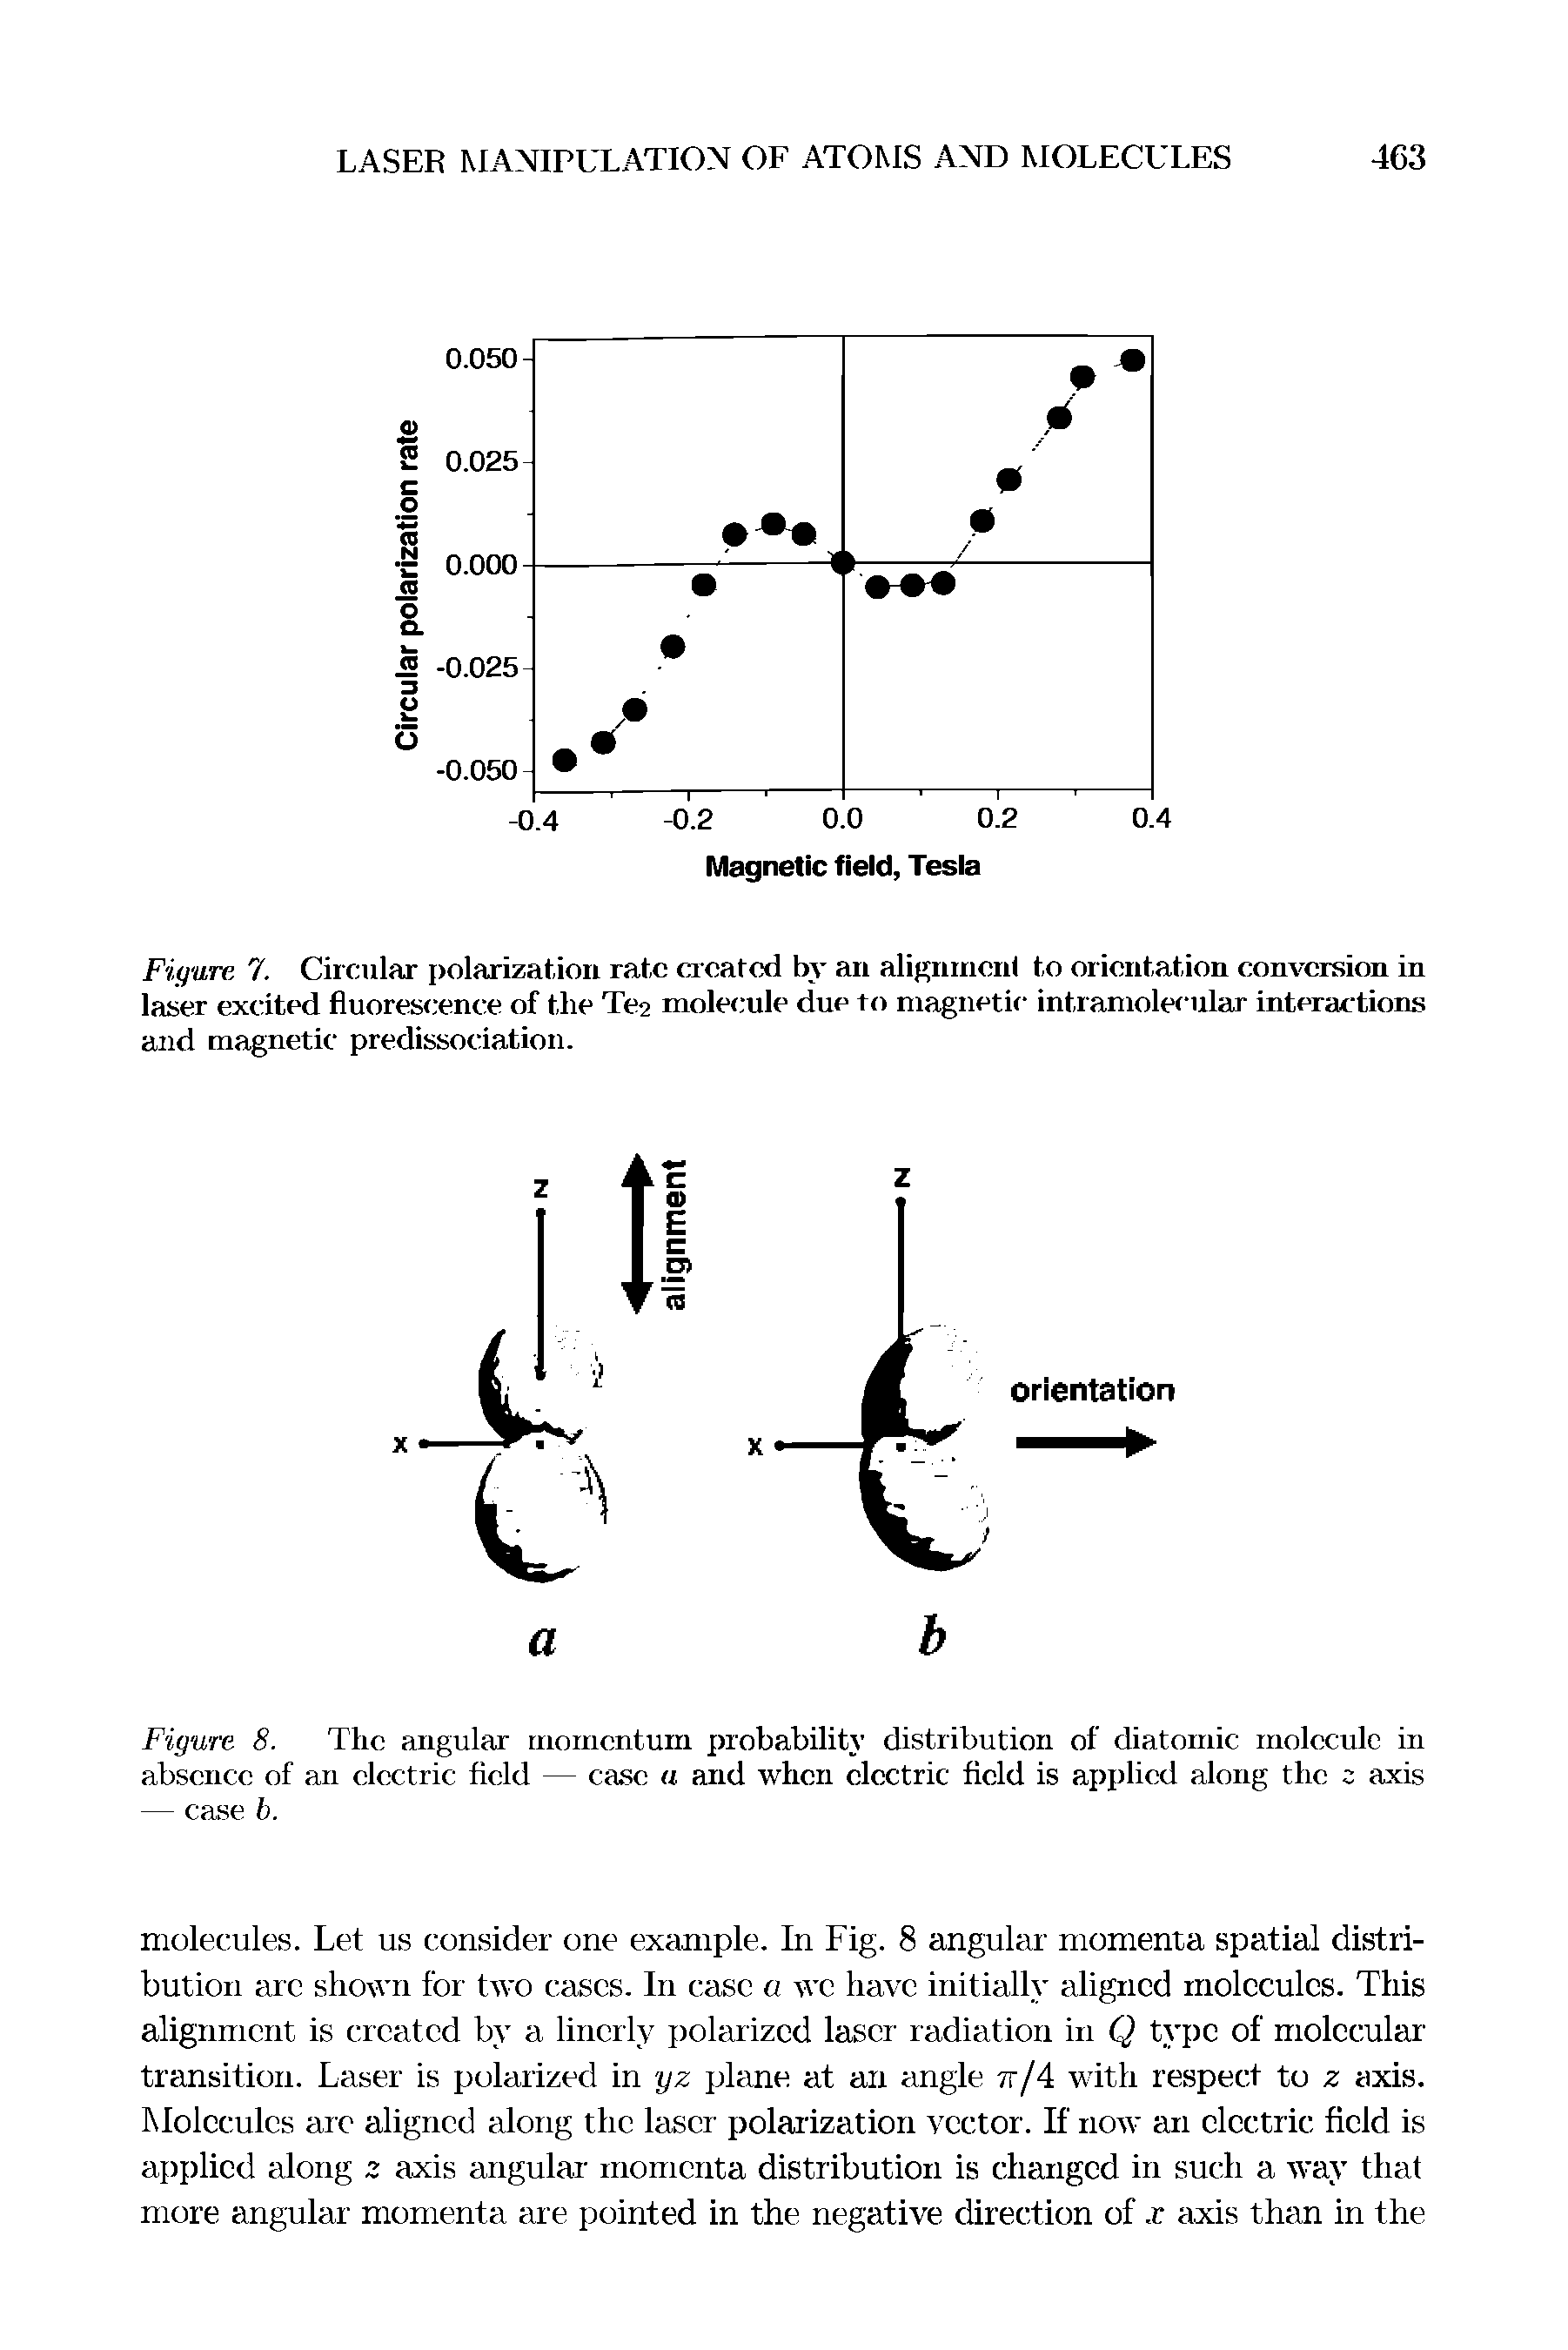 Figure 8. The angular momentum probability distribution of diatomic molecule in absence of an electric field — case a and when electric field is applied along the c axis — case b.